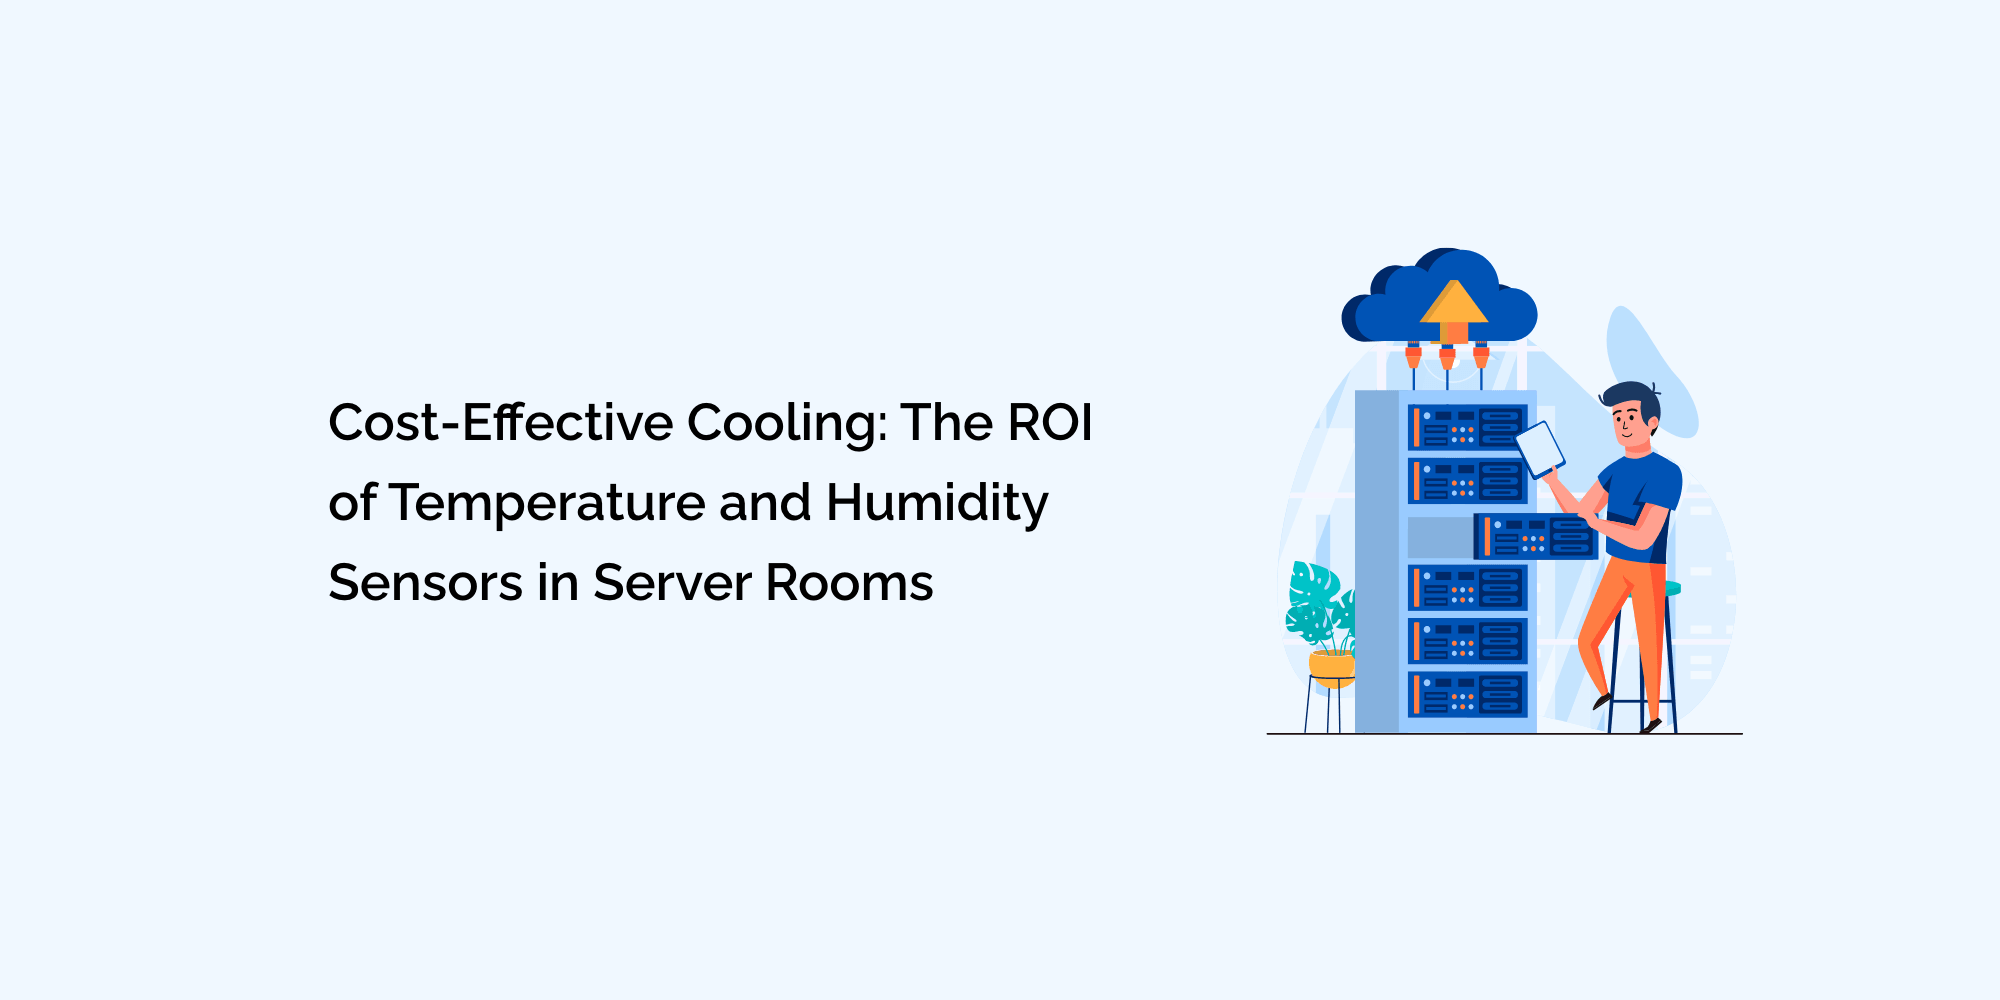 Cost-Effective Cooling: The ROI of Temperature and Humidity Sensors in Server Rooms